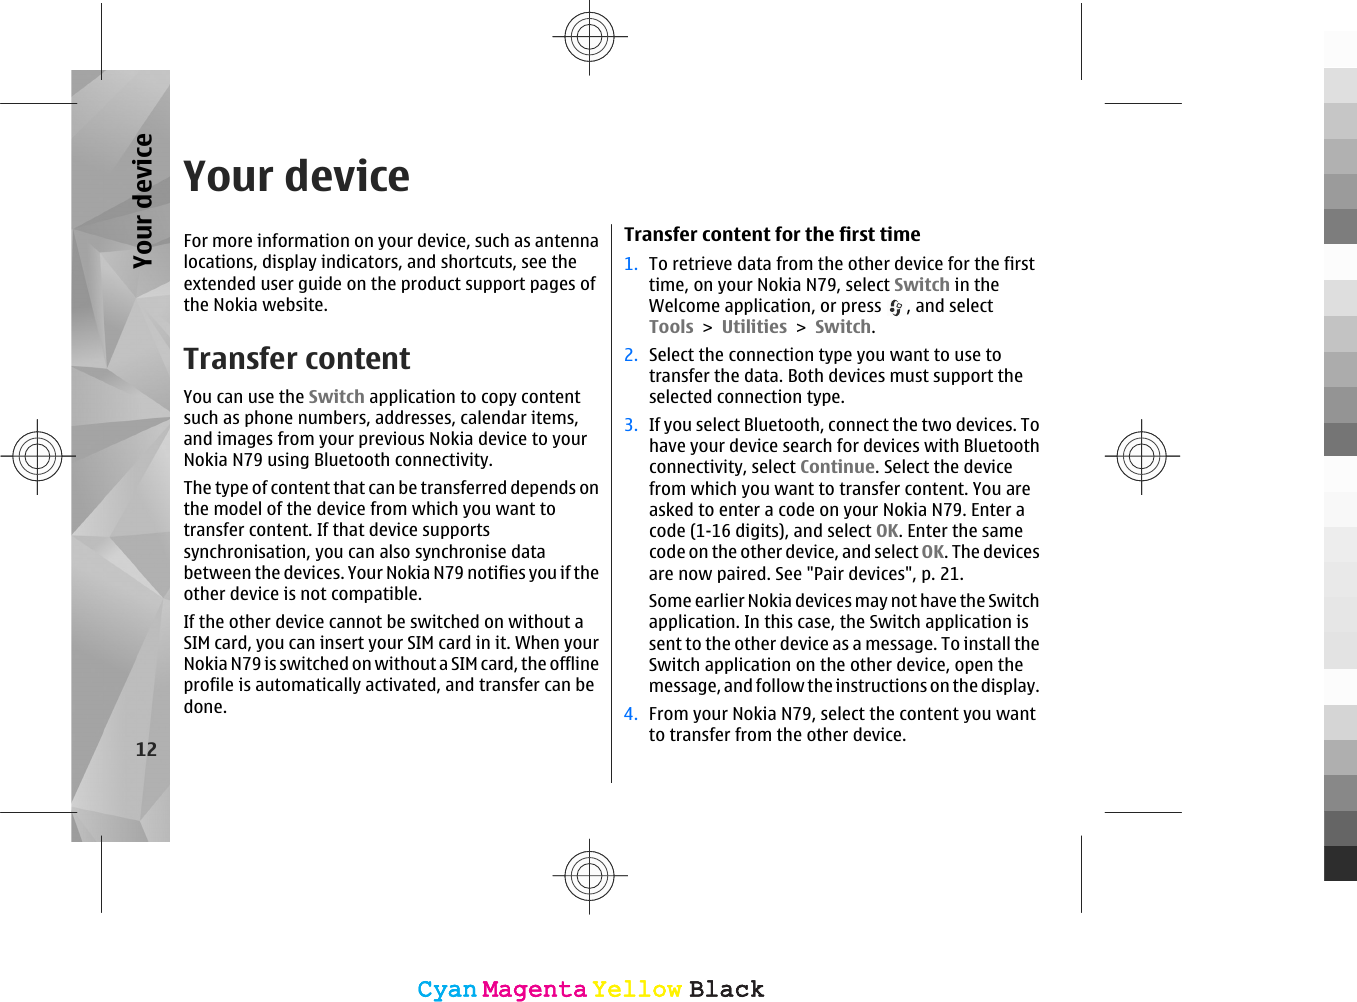 Your deviceFor more information on your device, such as antennalocations, display indicators, and shortcuts, see theextended user guide on the product support pages ofthe Nokia website.Transfer contentYou can use the Switch application to copy contentsuch as phone numbers, addresses, calendar items,and images from your previous Nokia device to yourNokia N79 using Bluetooth connectivity.The type of content that can be transferred depends onthe model of the device from which you want totransfer content. If that device supportssynchronisation, you can also synchronise databetween the devices. Your Nokia N79 notifies you if theother device is not compatible.If the other device cannot be switched on without aSIM card, you can insert your SIM card in it. When yourNokia N79 is switched on without a SIM card, the offlineprofile is automatically activated, and transfer can bedone.Transfer content for the first time1. To retrieve data from the other device for the firsttime, on your Nokia N79, select Switch in theWelcome application, or press  , and selectTools &gt; Utilities &gt; Switch.2. Select the connection type you want to use totransfer the data. Both devices must support theselected connection type.3. If you select Bluetooth, connect the two devices. Tohave your device search for devices with Bluetoothconnectivity, select Continue. Select the devicefrom which you want to transfer content. You areasked to enter a code on your Nokia N79. Enter acode (1-16 digits), and select OK. Enter the samecode on the other device, and select OK. The devicesare now paired. See &quot;Pair devices&quot;, p. 21.Some earlier Nokia devices may not have the Switchapplication. In this case, the Switch application issent to the other device as a message. To install theSwitch application on the other device, open themessage, and follow the instructions on the display.4. From your Nokia N79, select the content you wantto transfer from the other device.12Your deviceCyanCyanMagentaMagentaYellowYellowBlackBlackCyanCyanMagentaMagentaYellowYellowBlackBlack